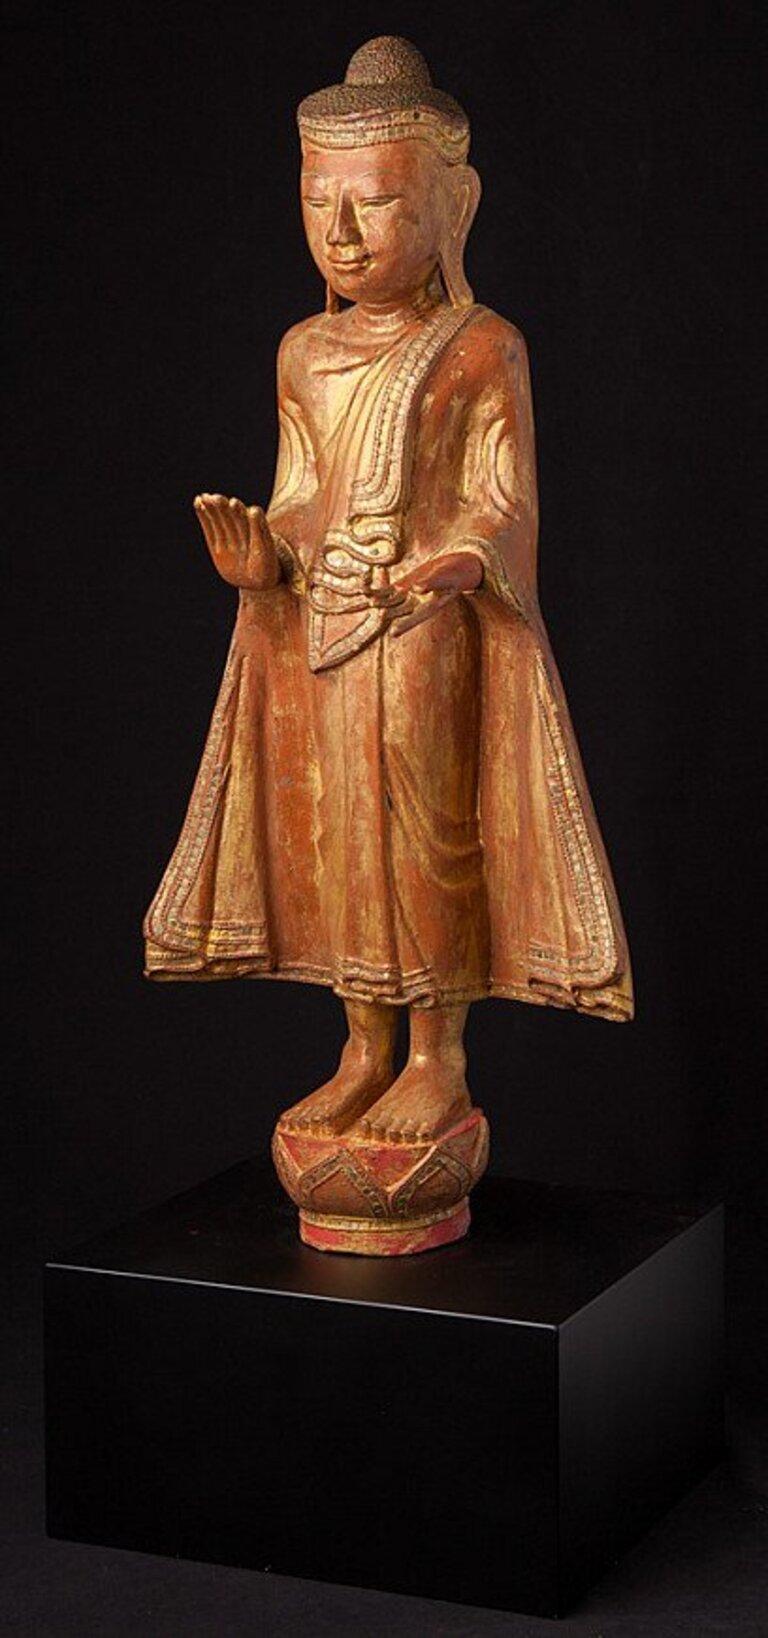 This antique wooden Buddha statue is a truly unique and special collectible piece. Standing at 79 cm high, 35 cm wide and 25 cm deep, it is made of wood, and it is gilded with 24 krt gold. The intricate details on the statue are adding to its beauty